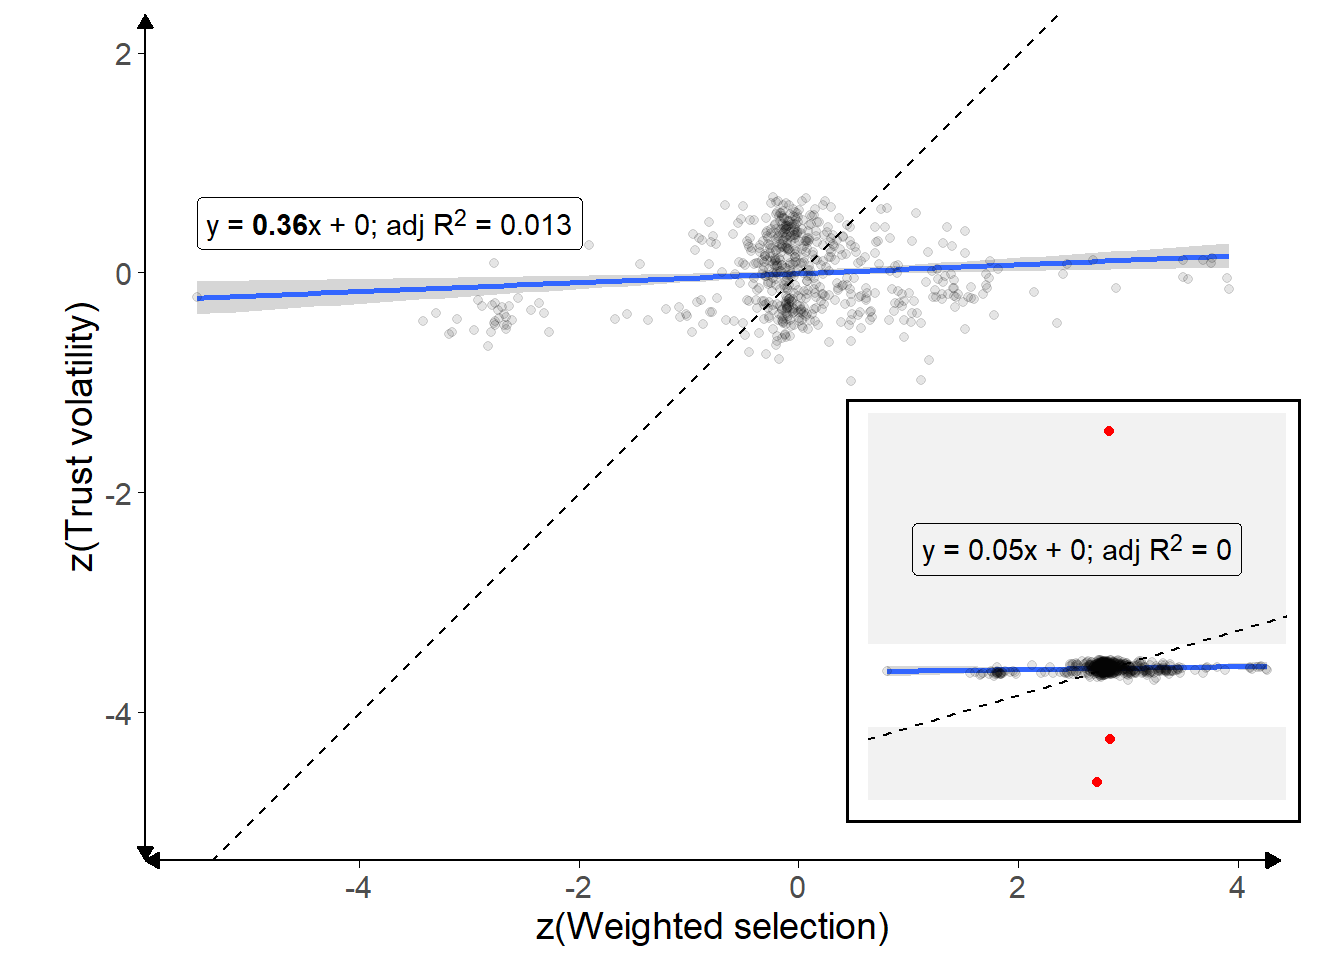 Correlation of recovered parameters.<br/> Outliers with extreme trust volatility values (|z| > 5) have been dropped, and are shown on the inset plot for context. Each point is a participant, and the solid blue line shows the overall relationship (with 95\% confidence intervals shaded in grey). The formula for the line is given in the top-left. Dashed line indicates a 1:1 correlation.